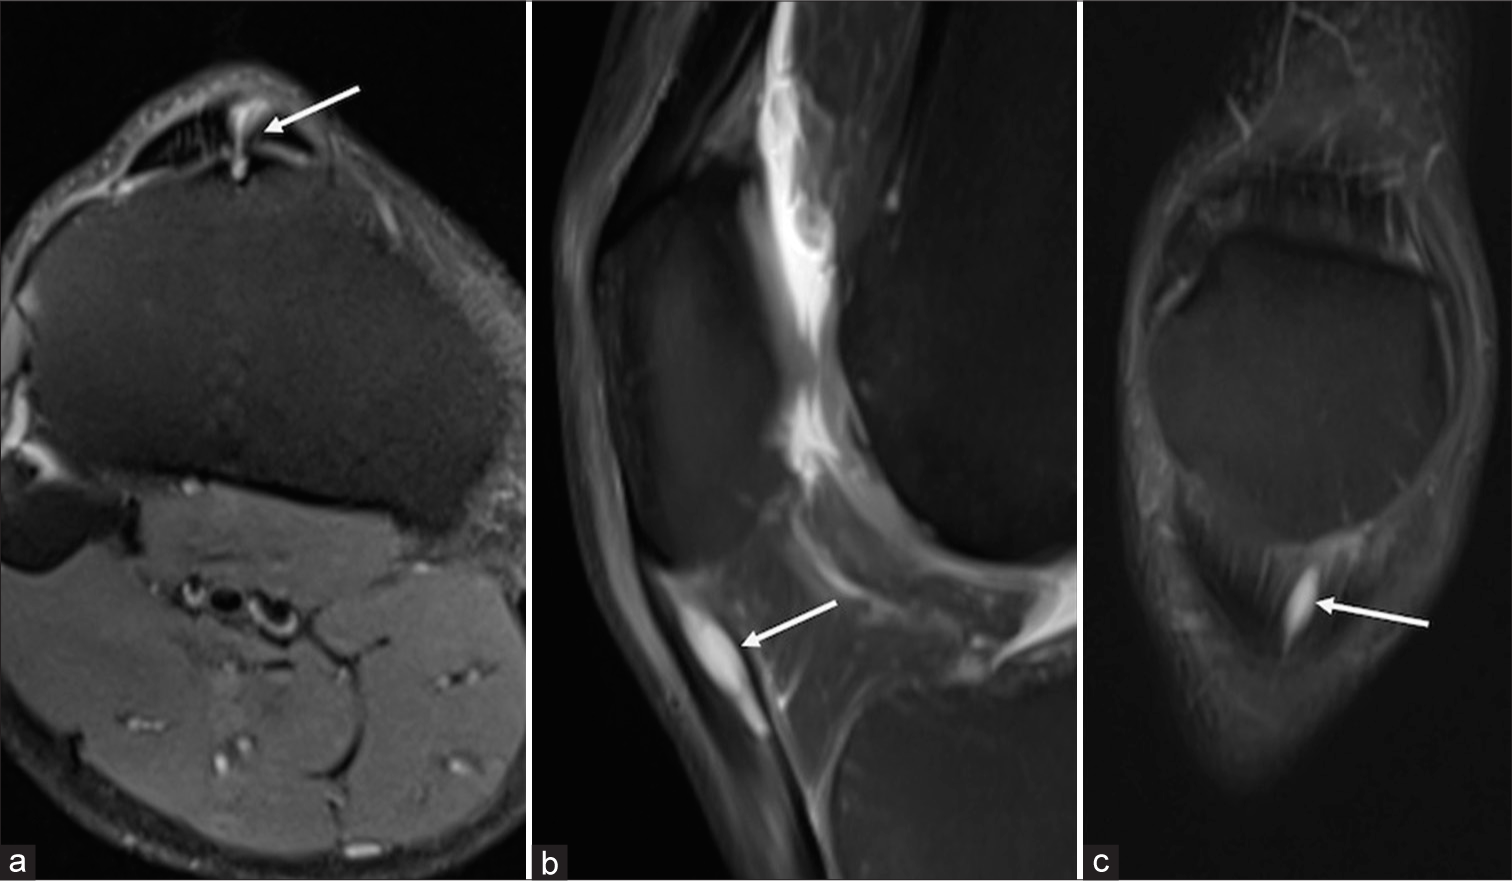 Unusual etiology of anterior knee pain in a young athlete engaged in chronic jumping exercises: The intratendinous ganglionic cyst of the patellar tendon